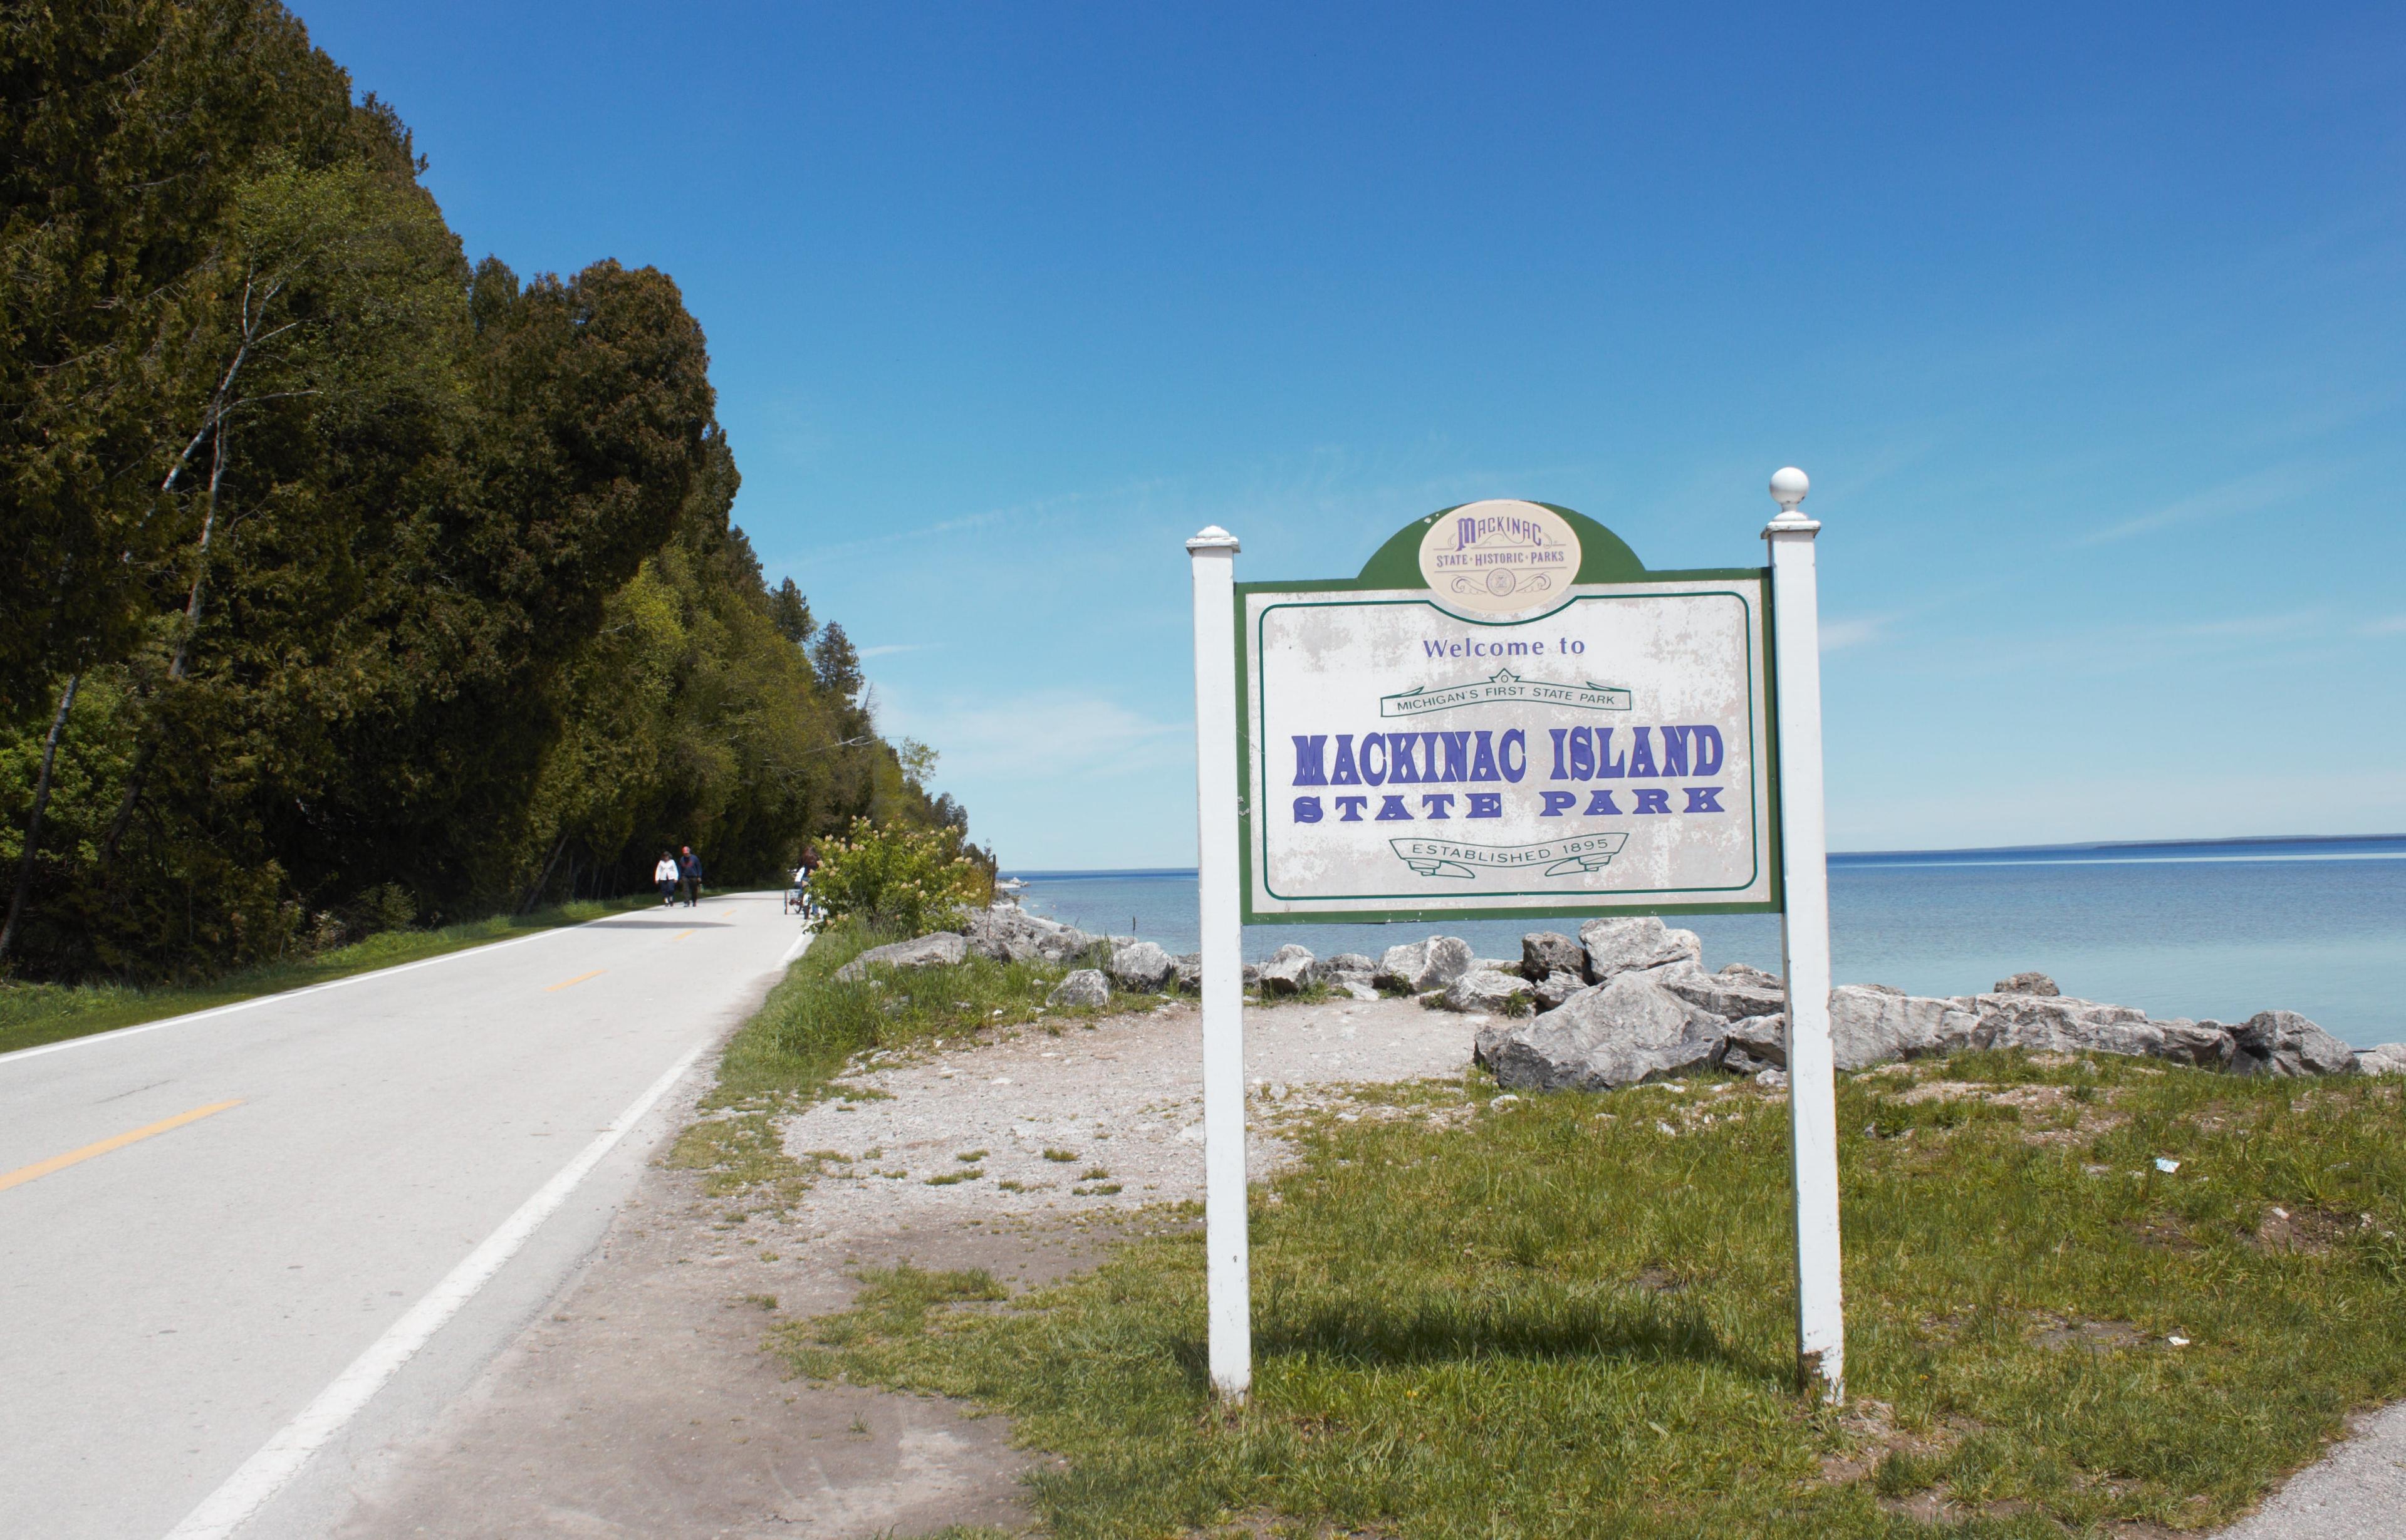 Image of sign welcoming visitors to Mackinac Island State Park.